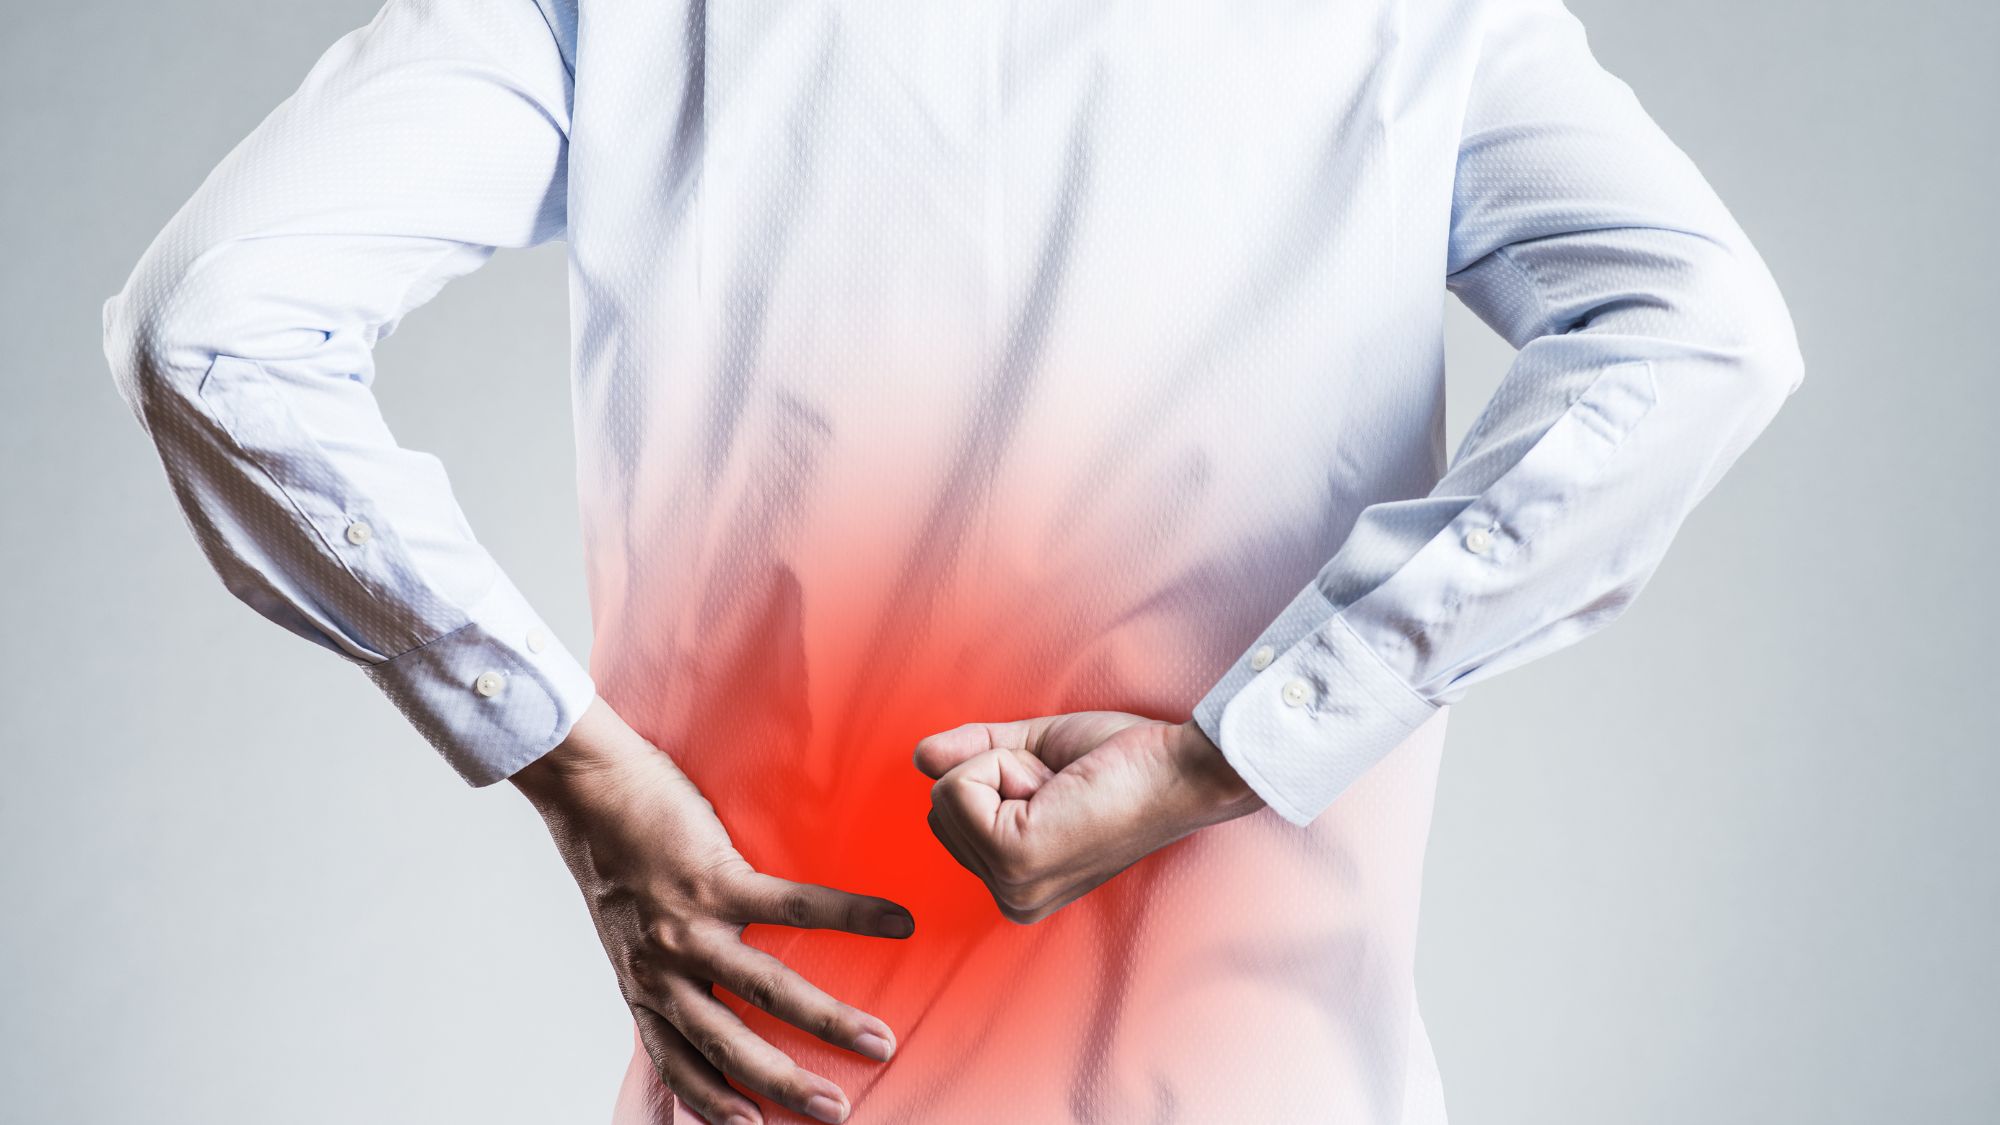 Image of a man in a white shirt with low back pain indicated in red.